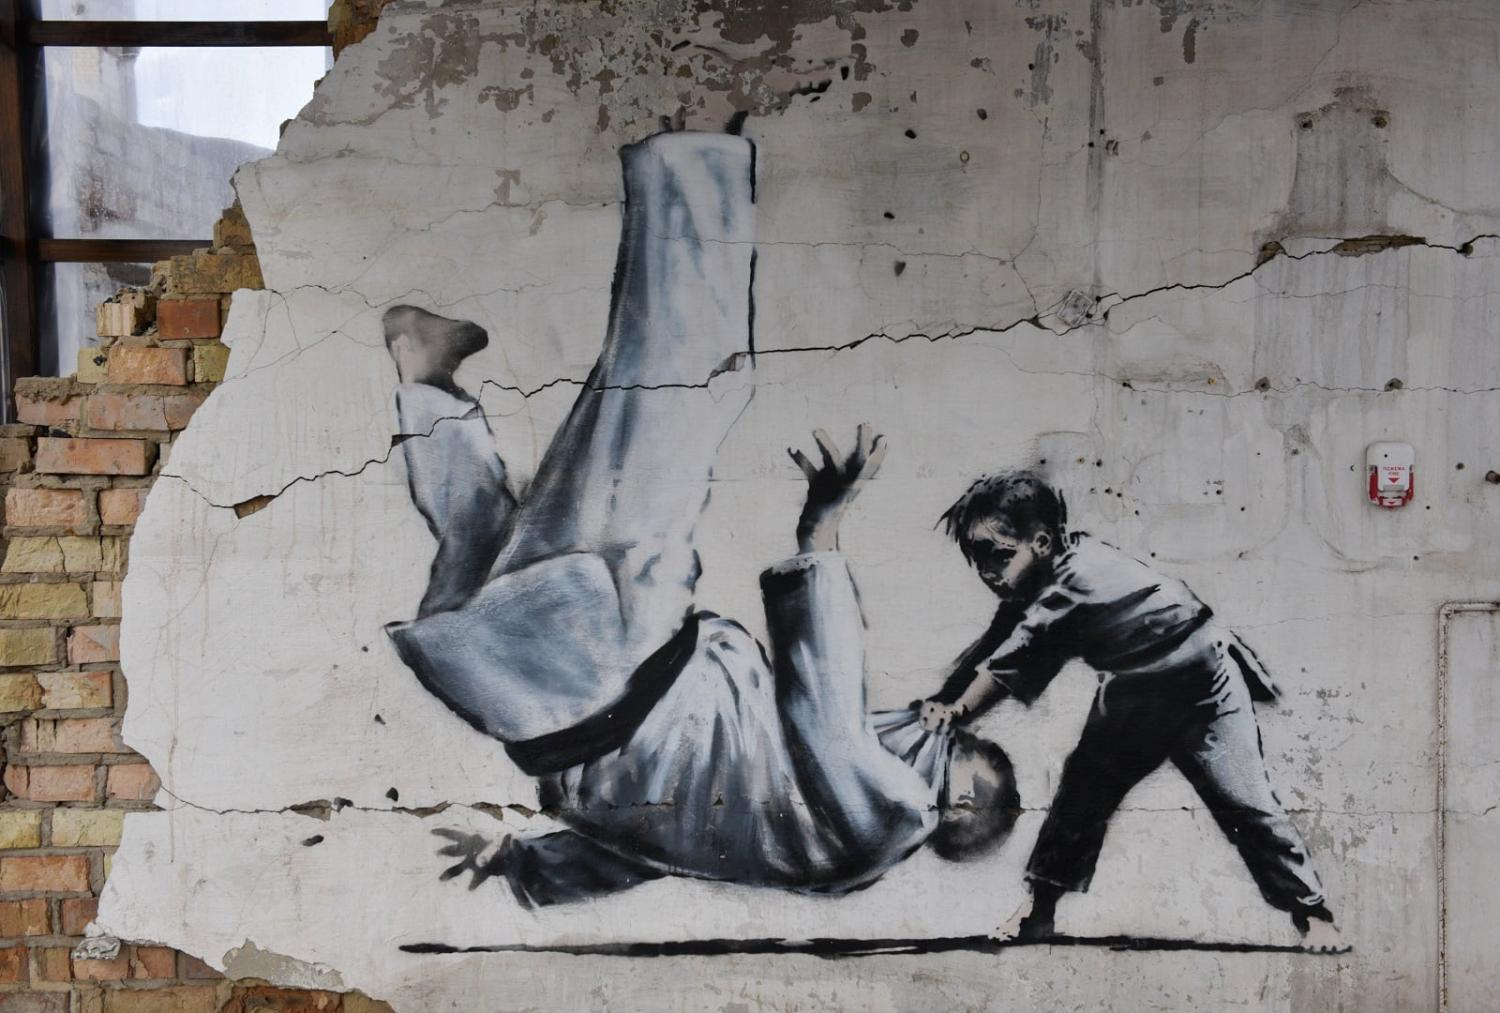 The Banksy graffiti depicting Vladimir Putin being flipped in a judo match appeared last year  on a wall in Borodyanka, near the capital Kyiv ©Getty Images